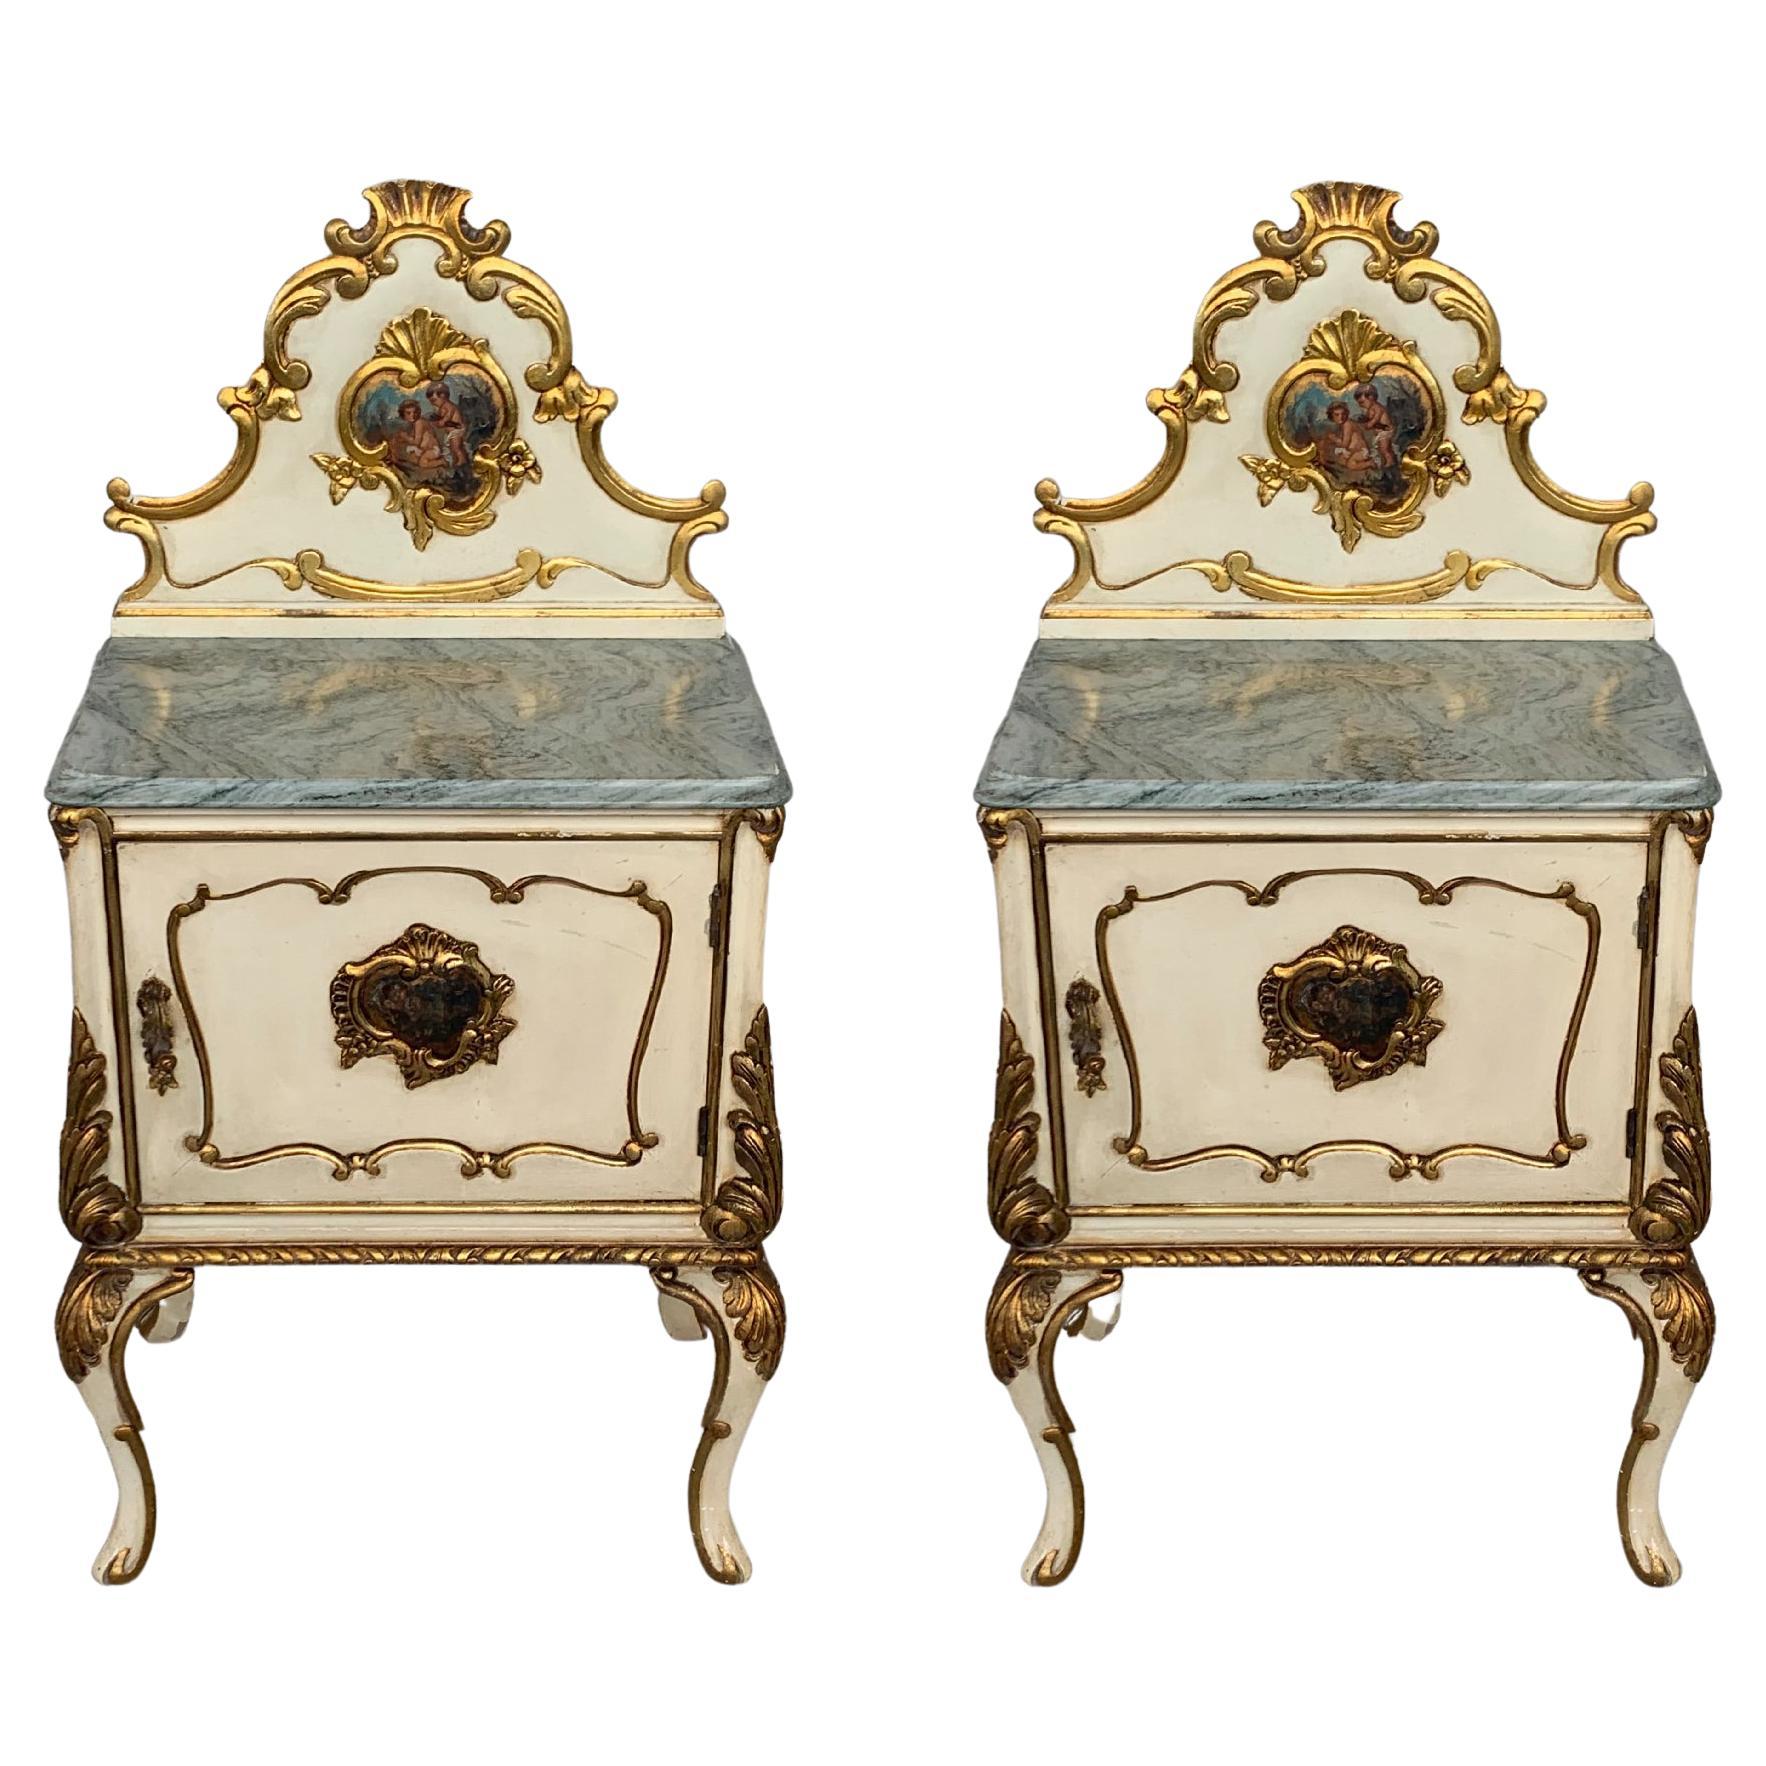 Pair of White Venetian Nightstands with Marble Top and Crest Handpainted Motifs